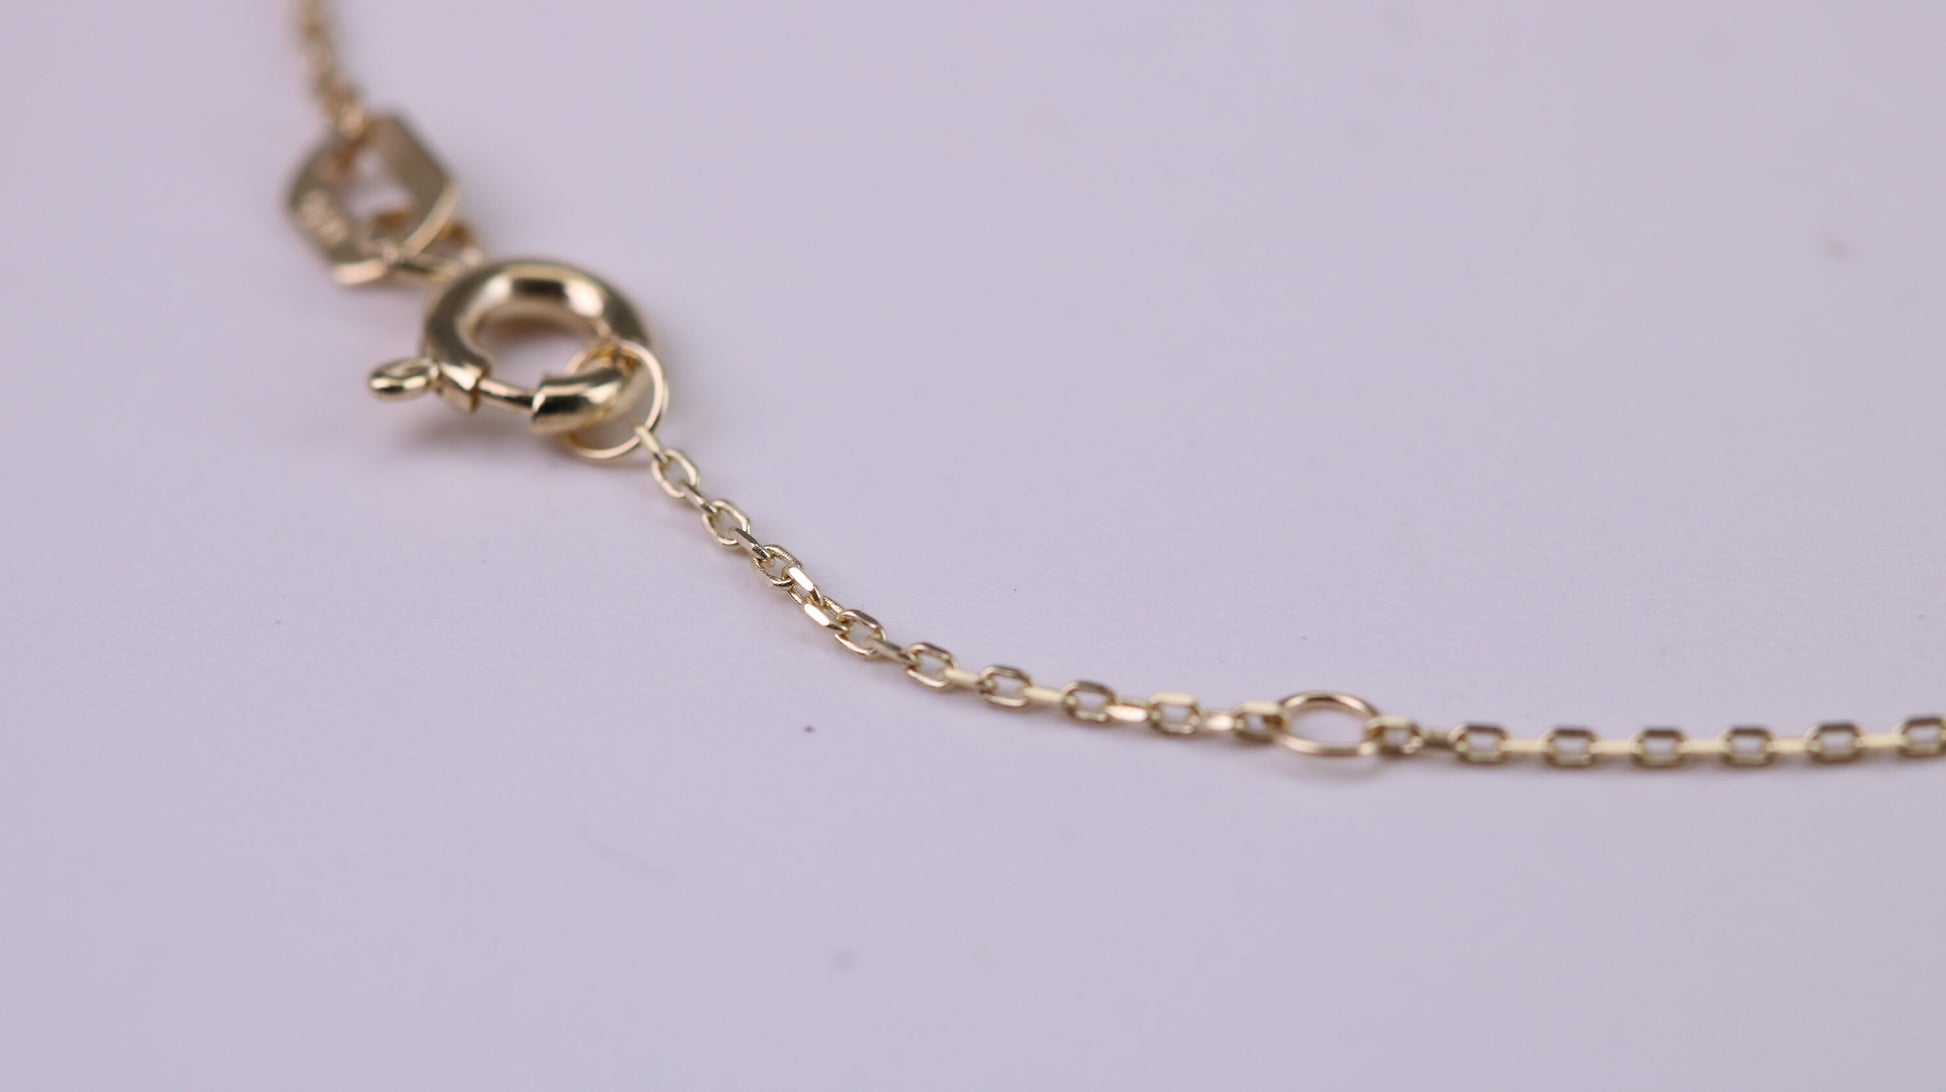 Simple and very Dainty 10 mm Long Cross Bracelet, Length Adjustable Chain, Made from Solid Yellow Gold with High Polished Finish